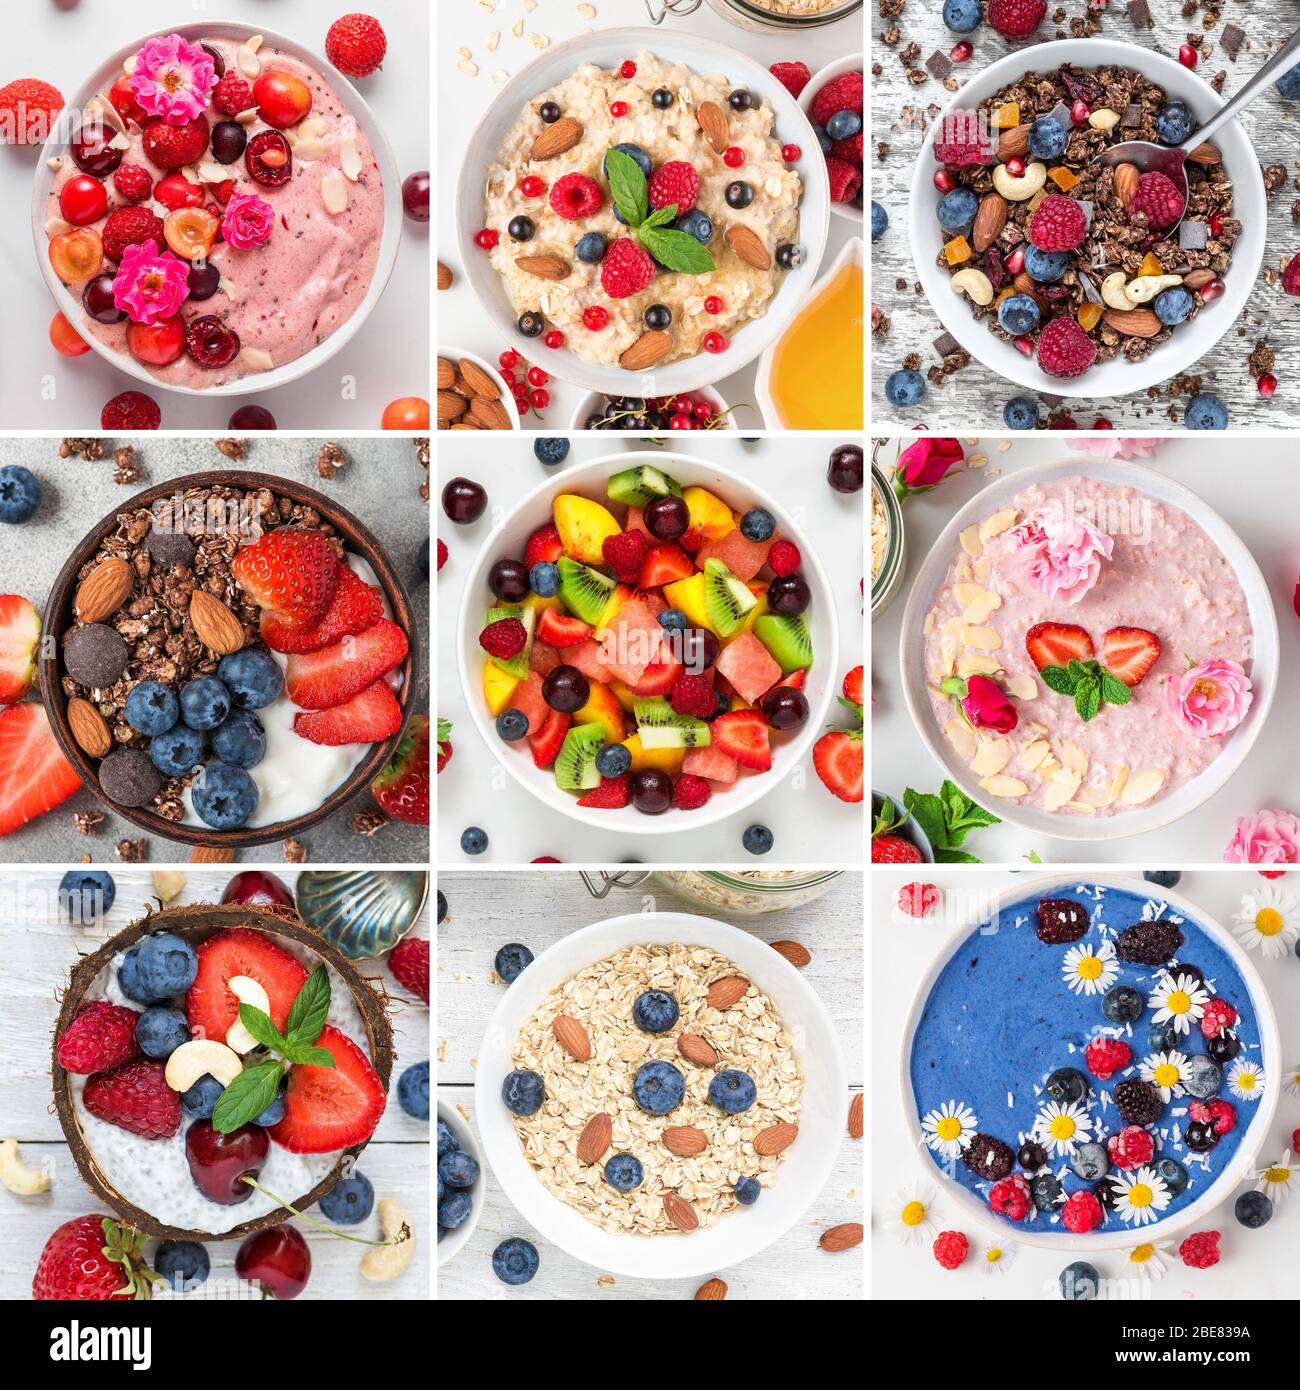 Collage of different breakfast food. Bowls with oatmeal, yogurt, granola, salad, muesli. Top view. Square picture. Healthy diet food Stock Photo